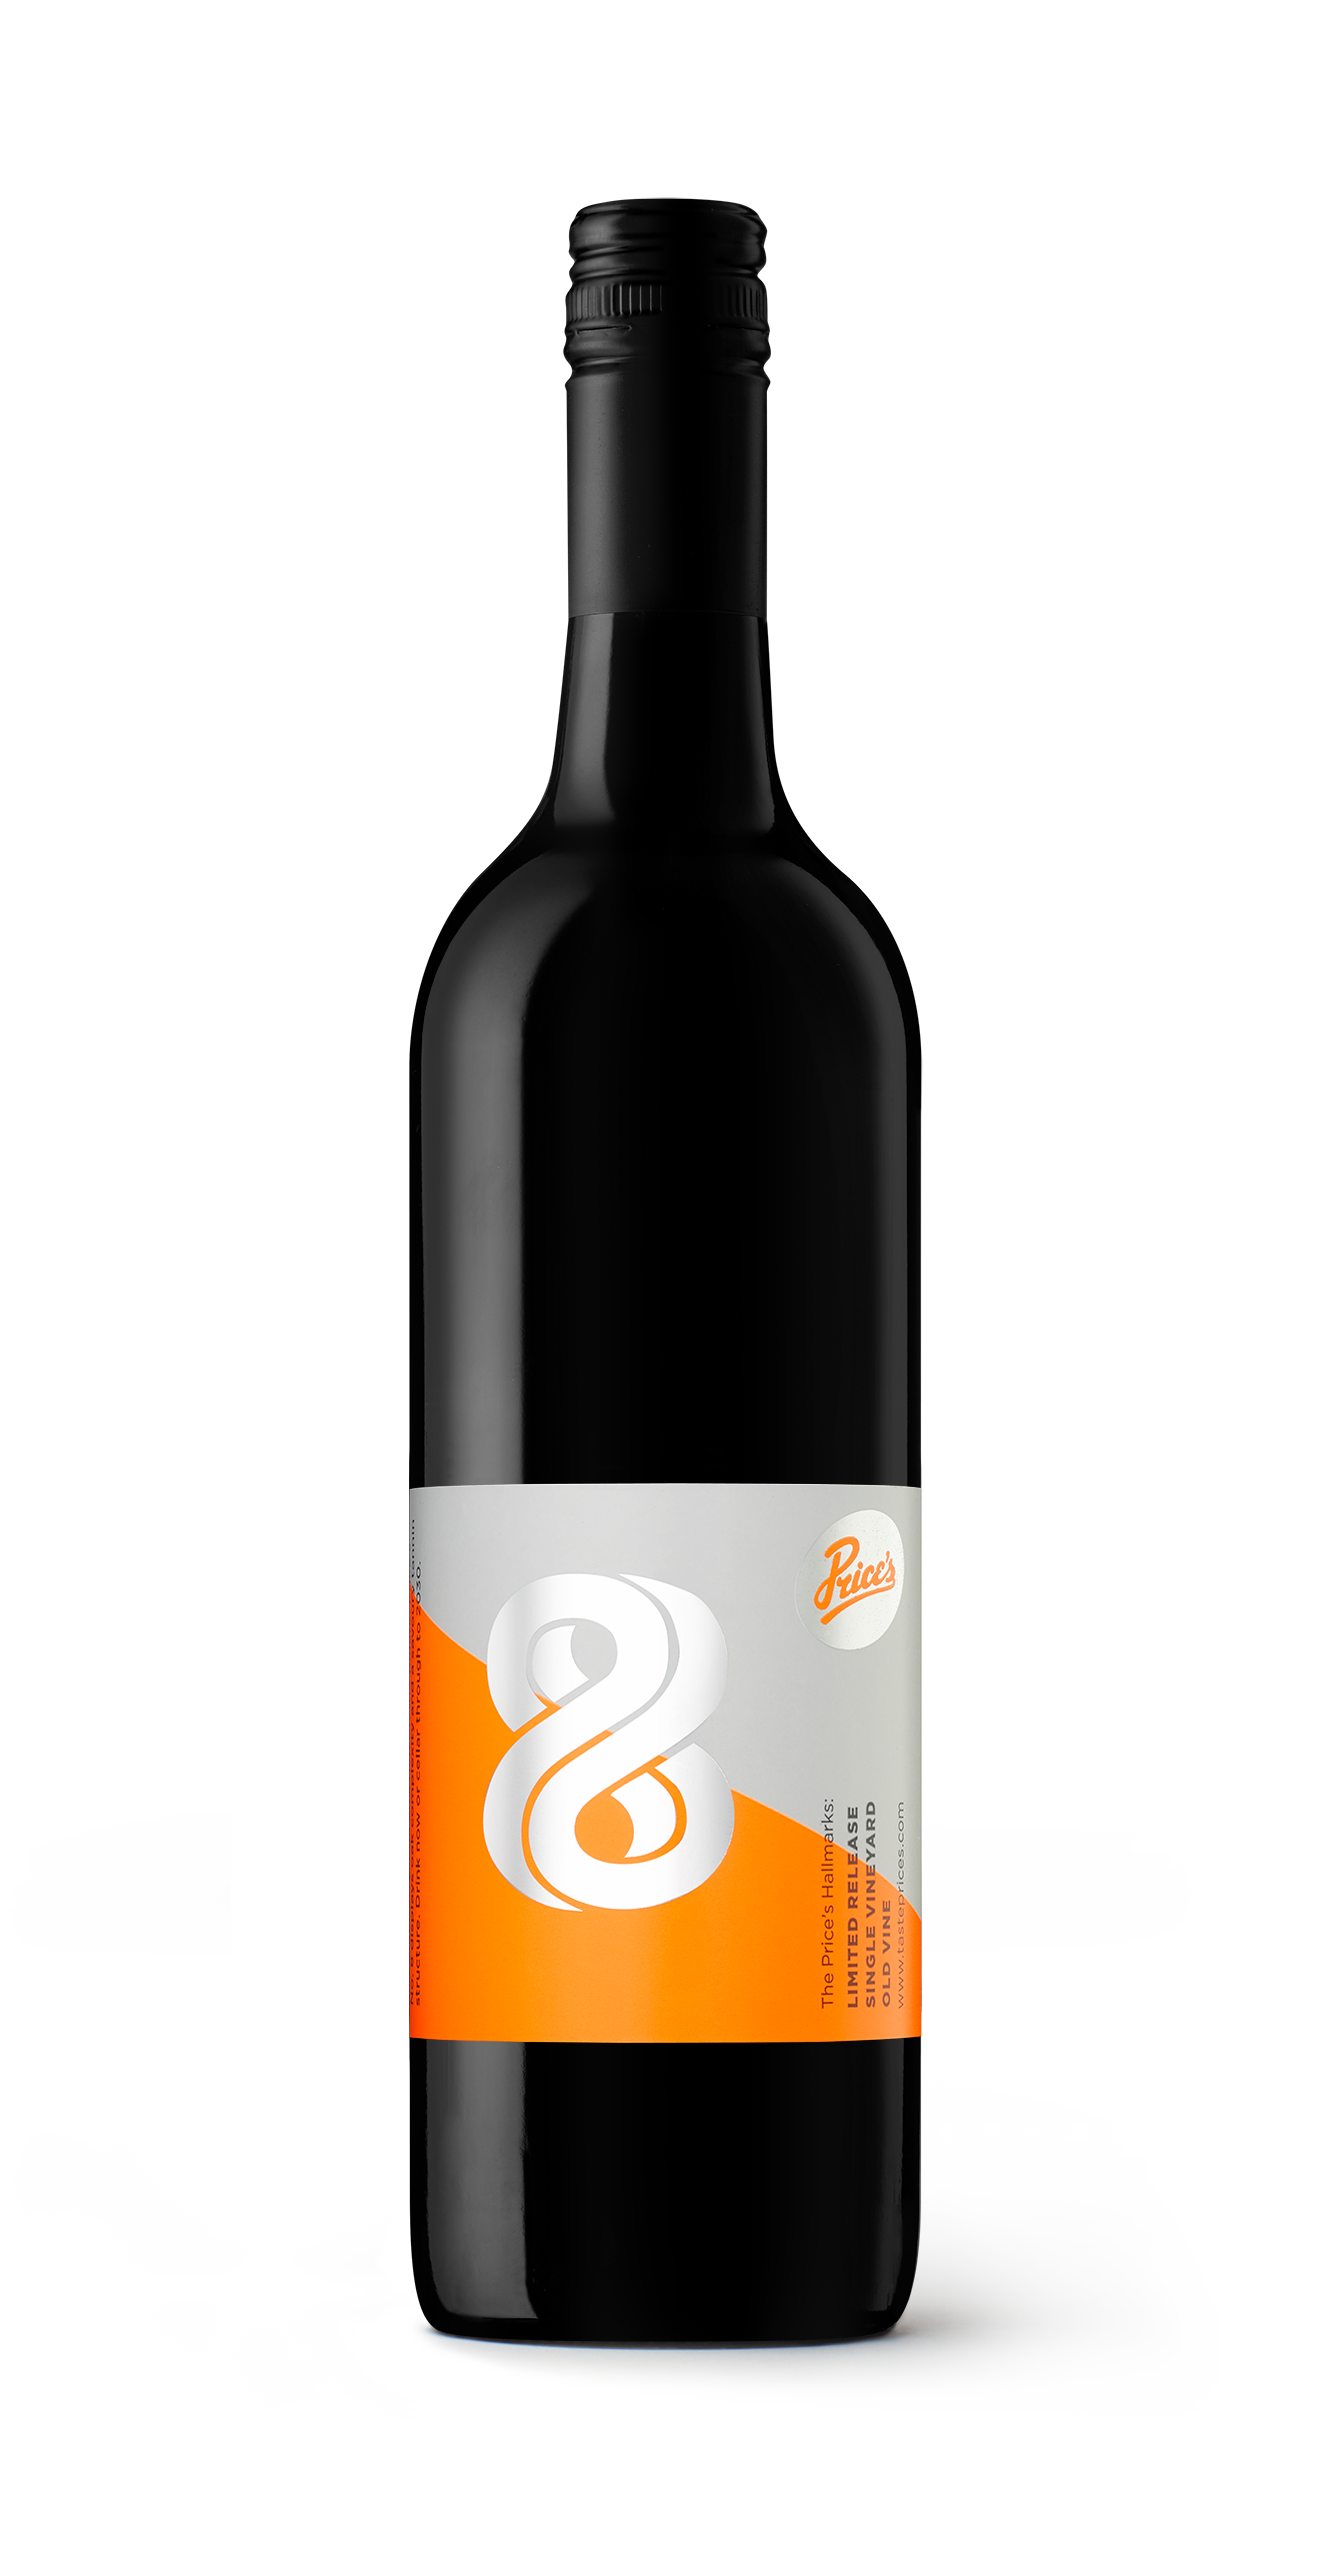 This bottle of Cabernet Sauvignon and Shiraz blend is from McLaren Vale. No.8 is a medium to full-bodied wine produced from old vines. It has a striking label and is of excellent quality from Price's Wines.